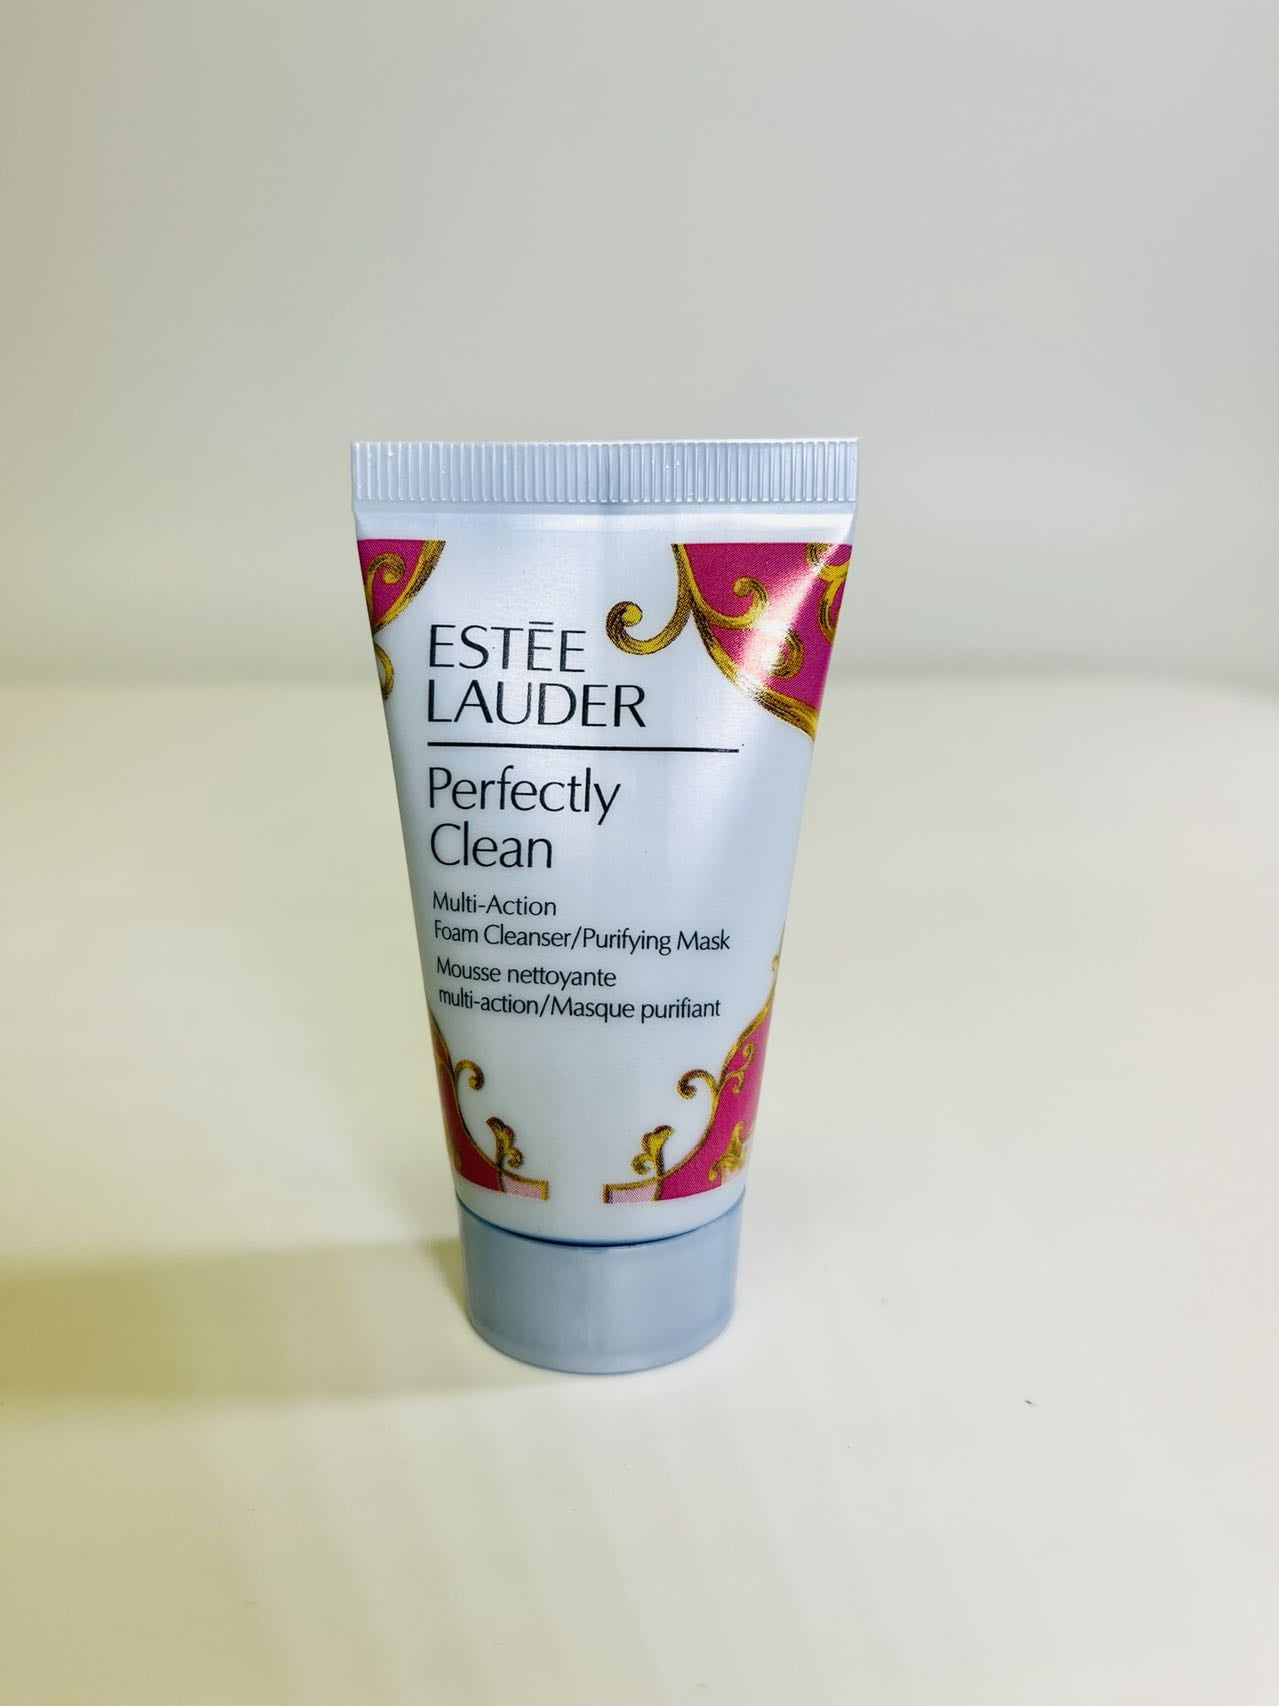 6x Estee Lauder Perfectly Clean Multi-Action Foam Cleanser/Purifying Mask,  1oz/30ml x 6 = 6oz/180ml